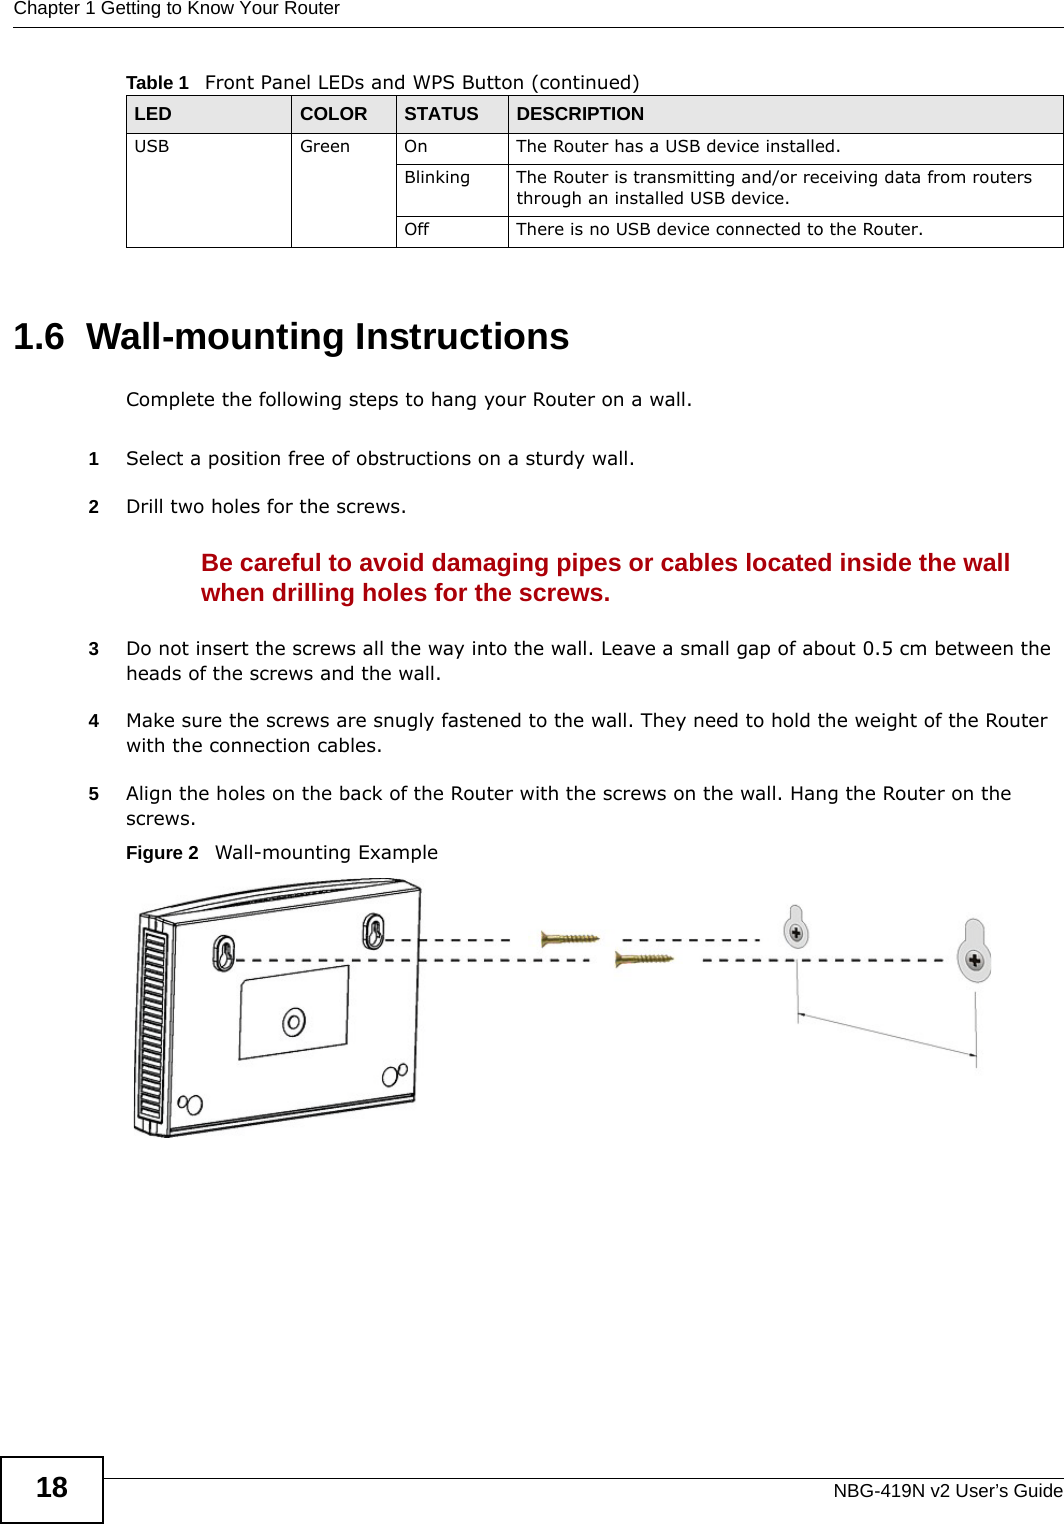 Chapter 1 Getting to Know Your RouterNBG-419N v2 User’s Guide181.6  Wall-mounting InstructionsComplete the following steps to hang your Router on a wall.1Select a position free of obstructions on a sturdy wall. 2Drill two holes for the screws. Be careful to avoid damaging pipes or cables located inside the wall when drilling holes for the screws.3Do not insert the screws all the way into the wall. Leave a small gap of about 0.5 cm between the heads of the screws and the wall. 4Make sure the screws are snugly fastened to the wall. They need to hold the weight of the Router with the connection cables. 5Align the holes on the back of the Router with the screws on the wall. Hang the Router on the screws.Figure 2   Wall-mounting ExampleUSB Green On The Router has a USB device installed.Blinking The Router is transmitting and/or receiving data from routers through an installed USB device.Off There is no USB device connected to the Router.Table 1   Front Panel LEDs and WPS Button (continued)LED COLOR STATUS DESCRIPTION